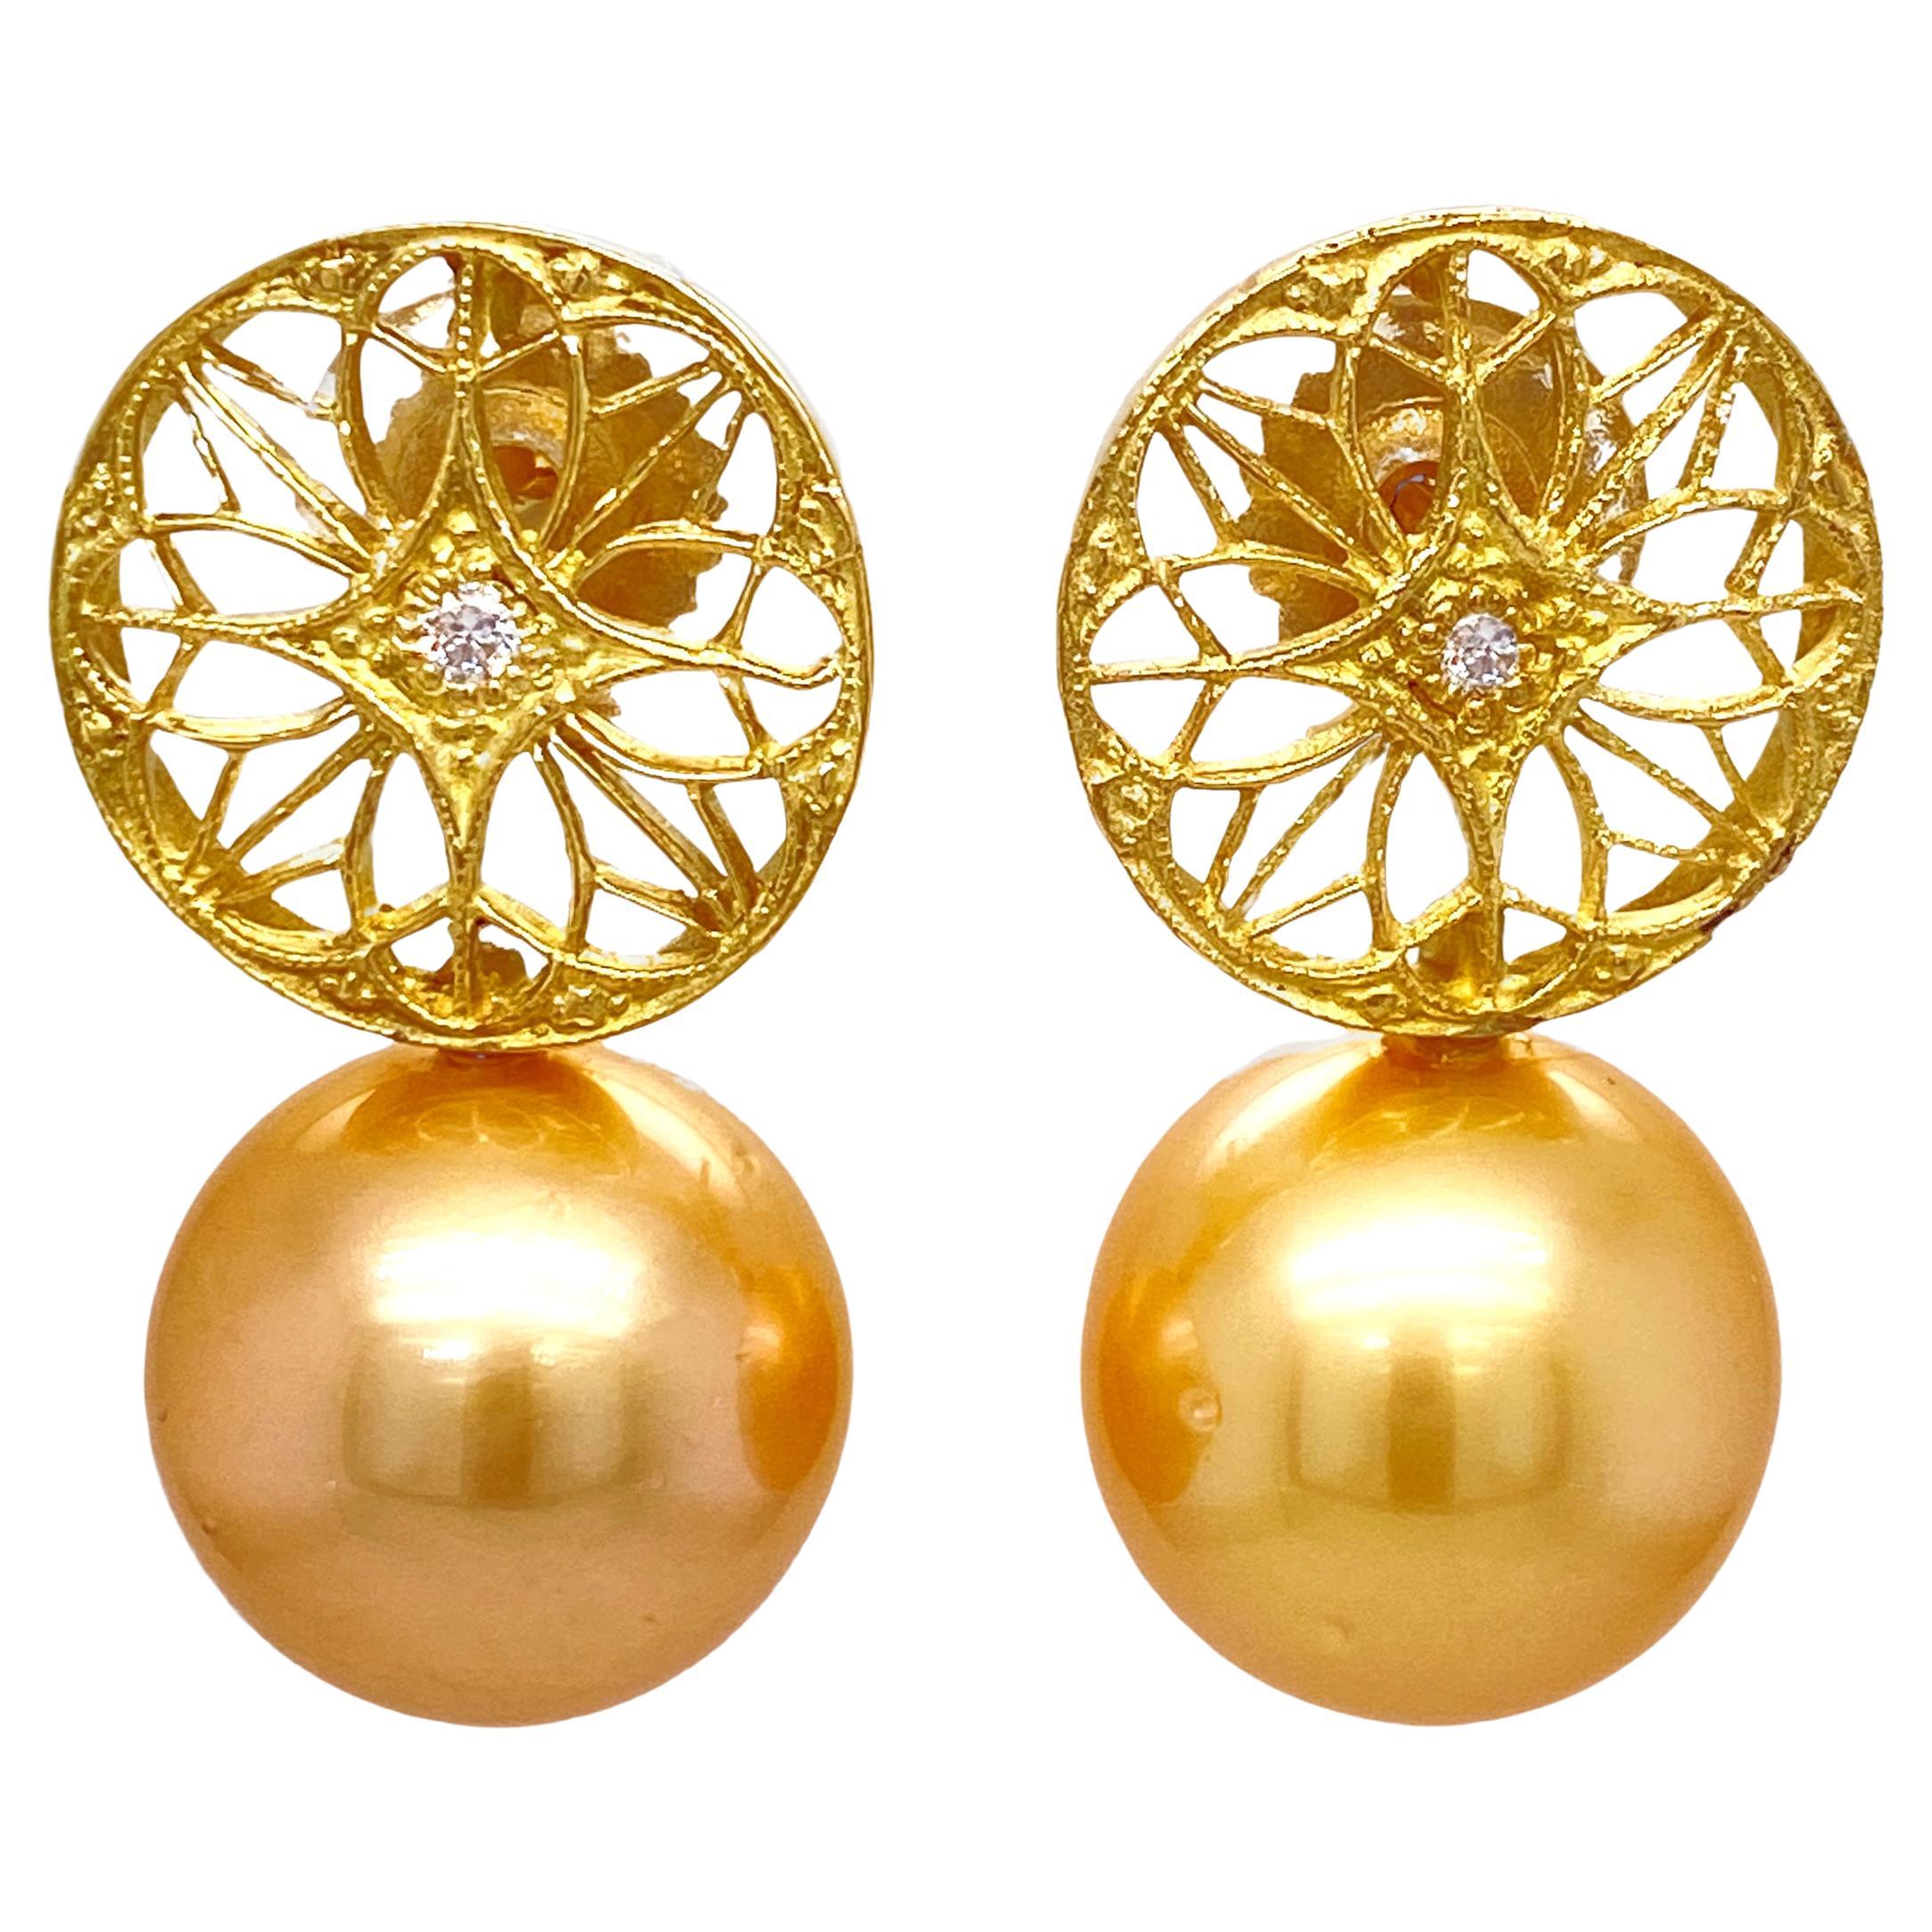 Golden South Sea Pearl Earrings with 18k Gold Filigree Tops, Diamond Accent